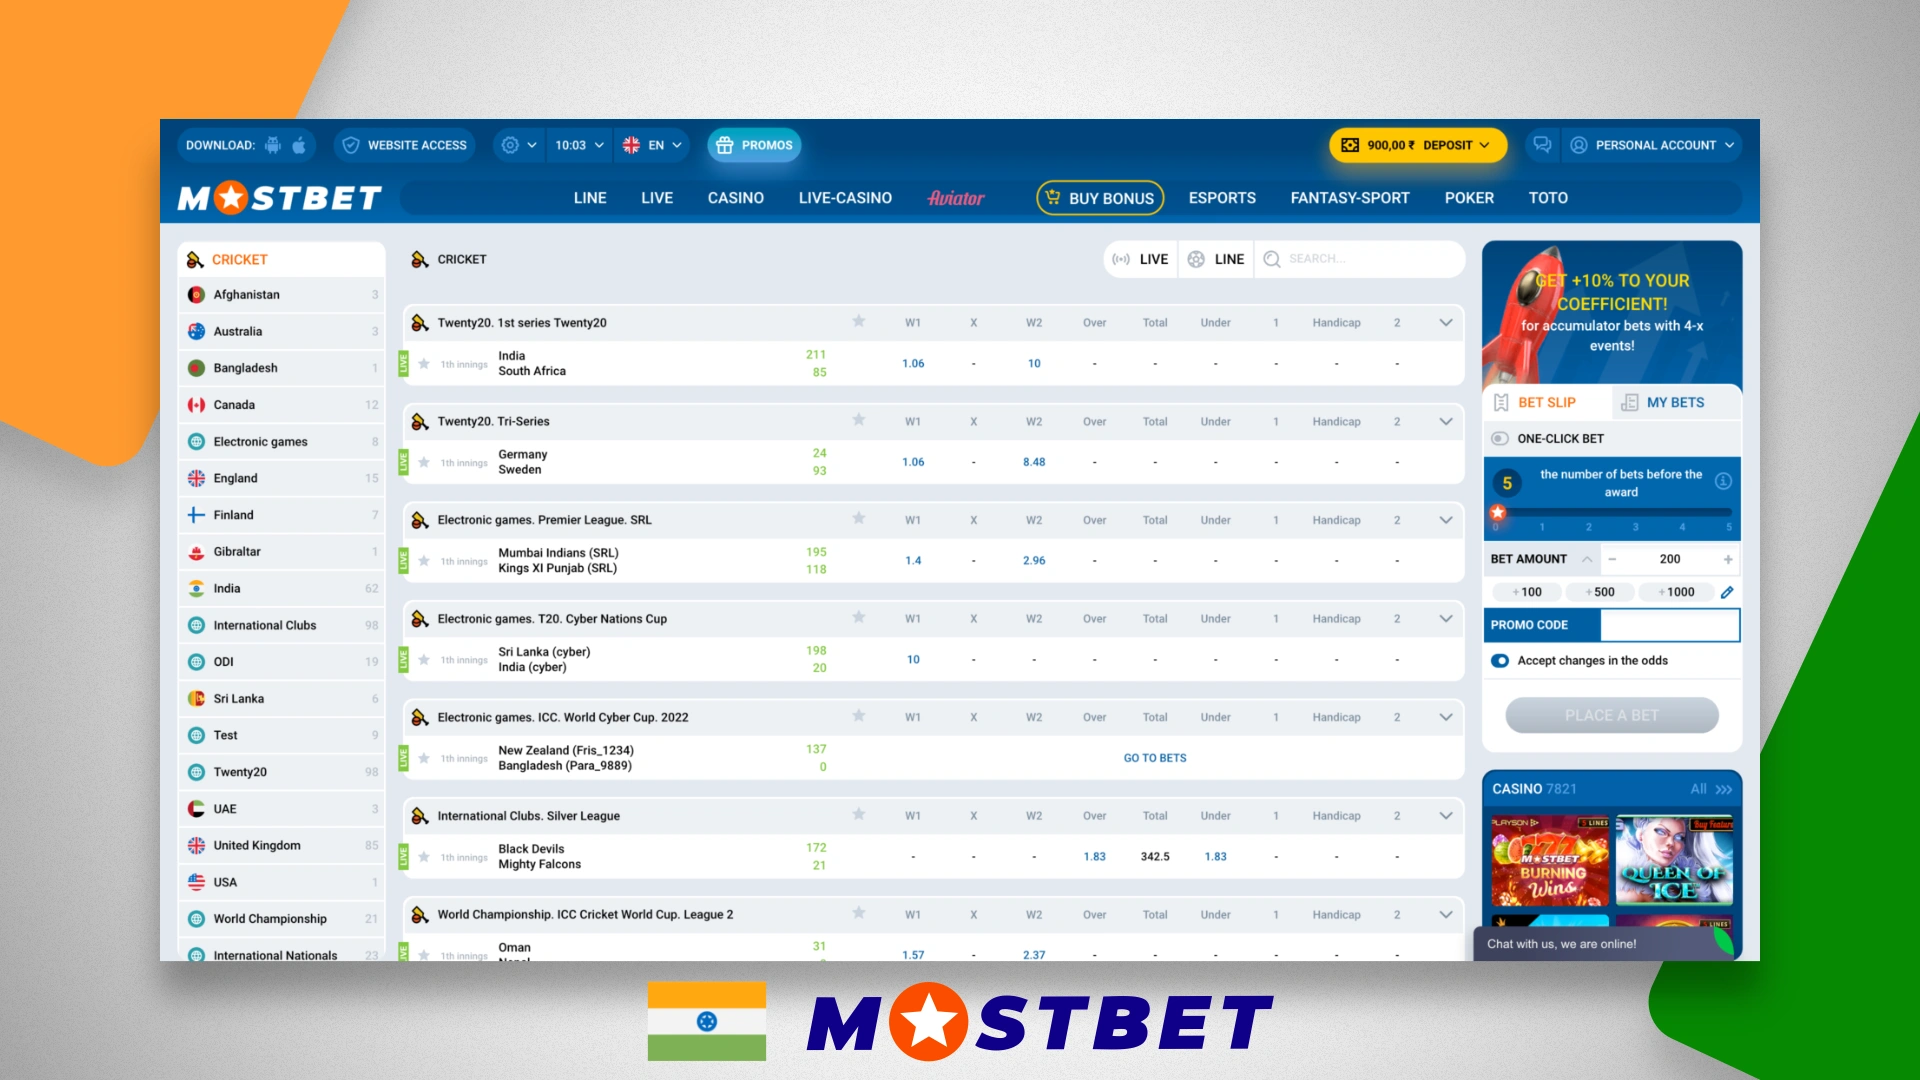 Cricket betting page on Mostbet India website